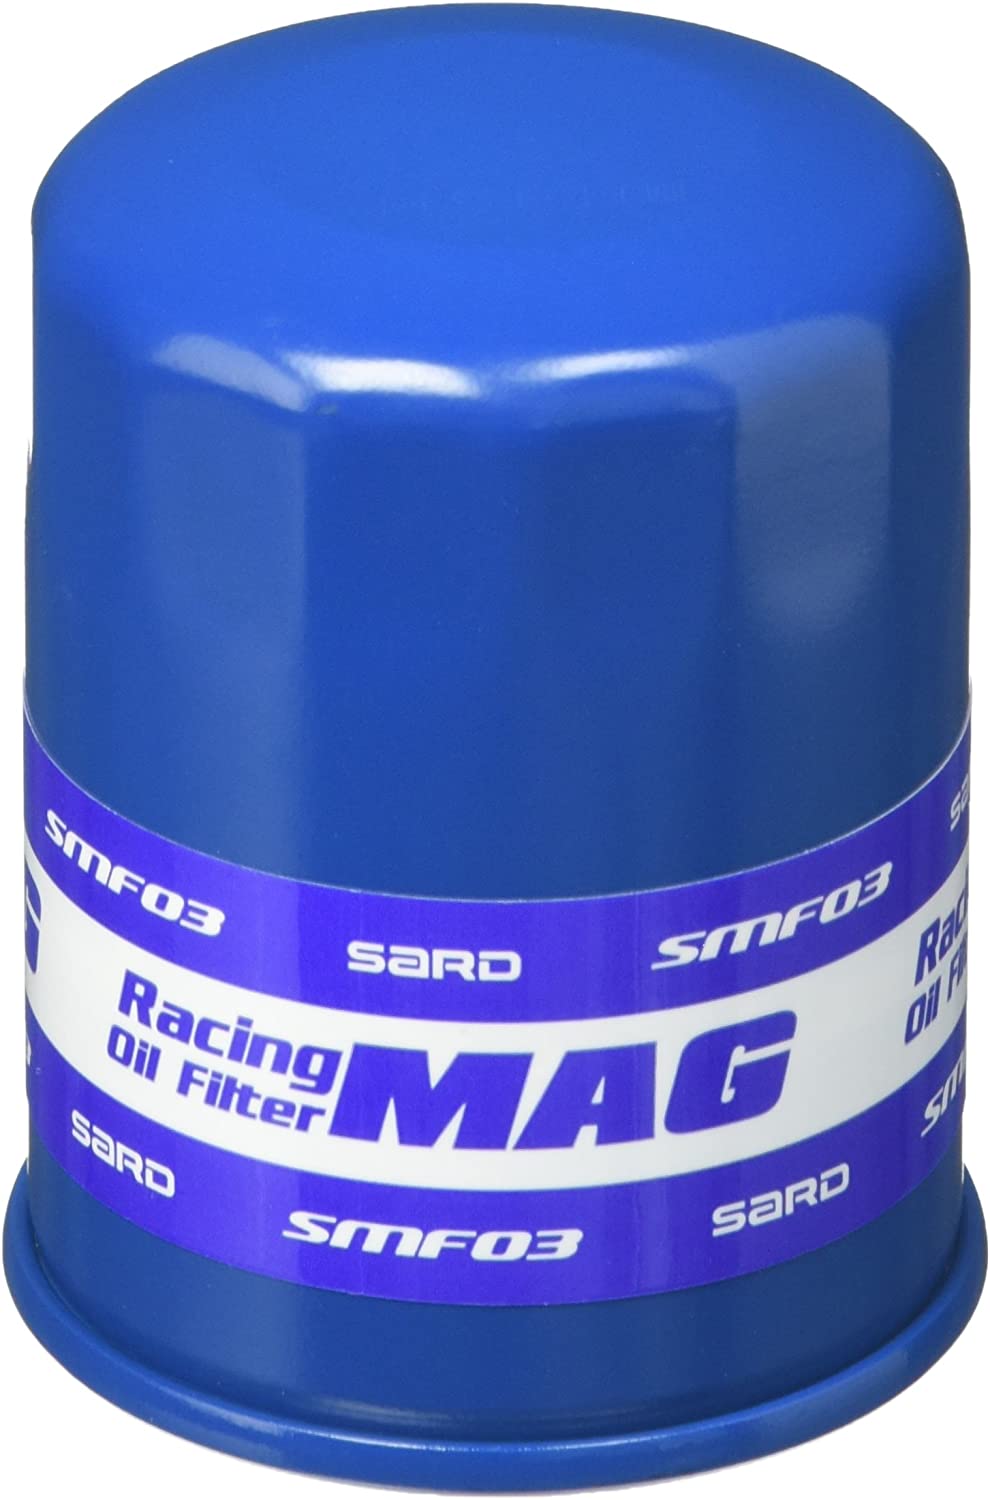 SARD RACING OIL FILTER For CIVIC EP3 SMF03